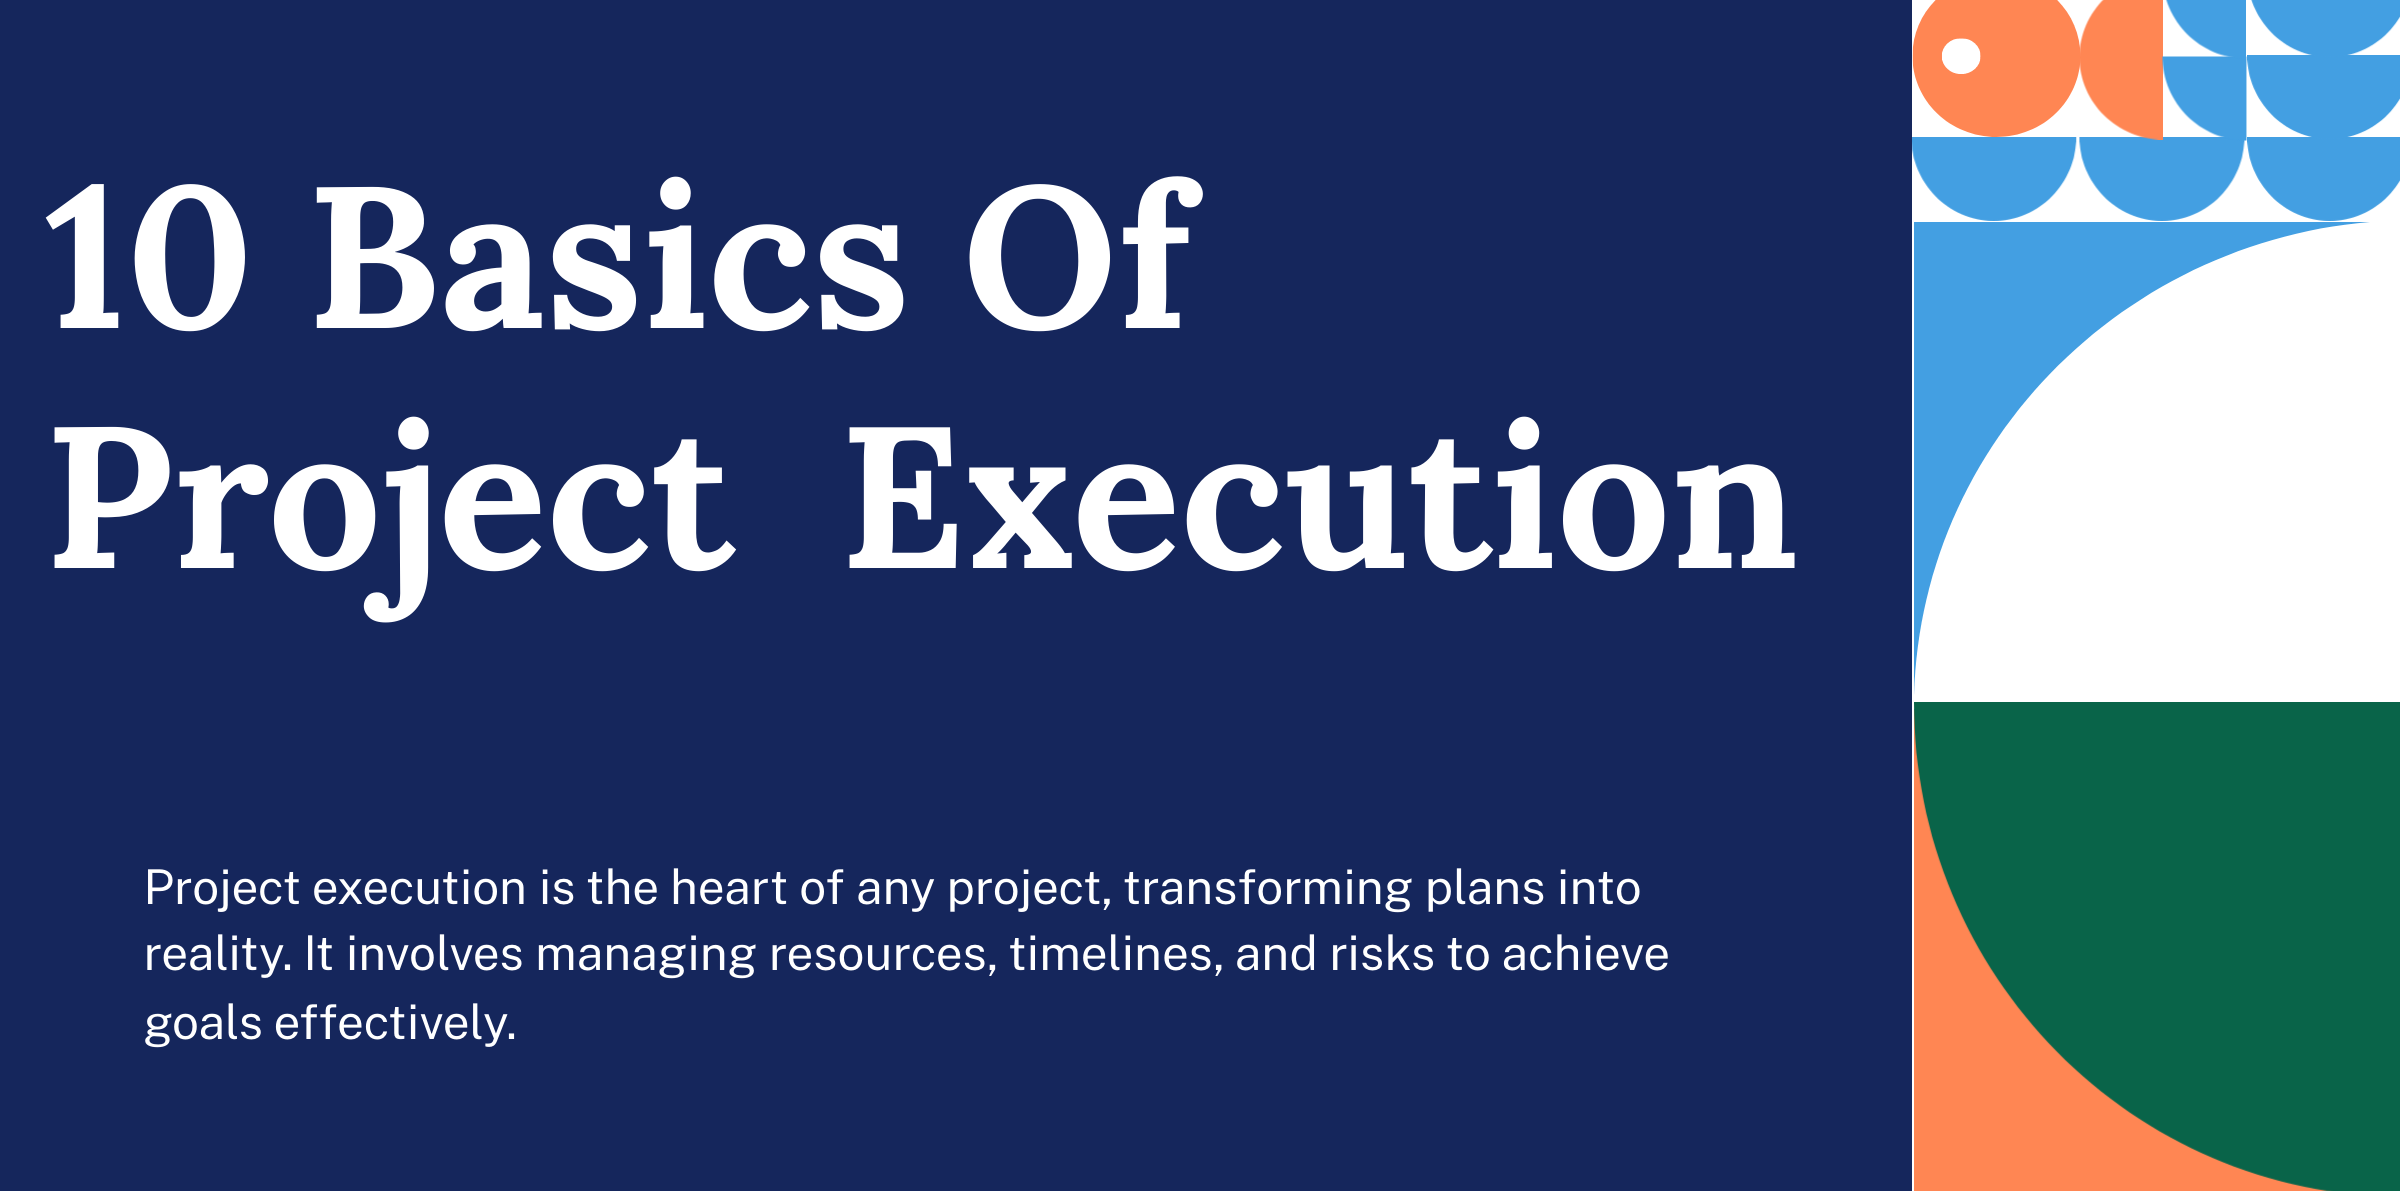 10 Basics Of Project Execution Feature